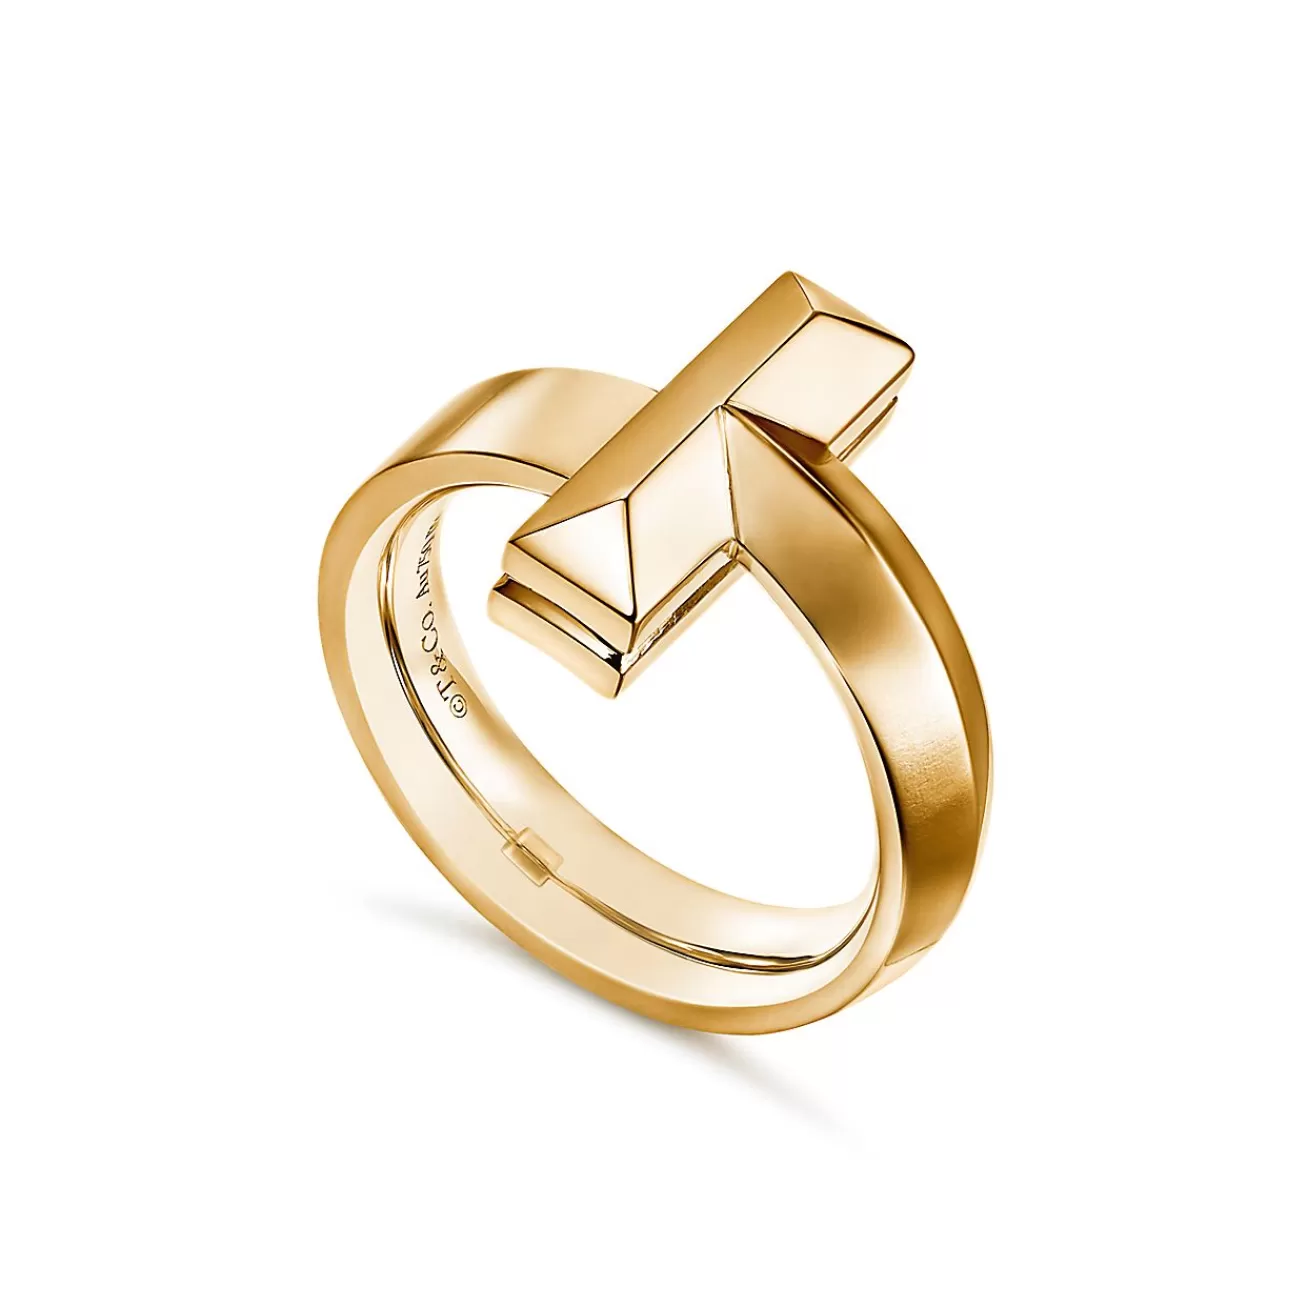 Tiffany & Co. Tiffany T T1 Ring in Yellow Gold, 4.5 mm Wide | ^ Rings | Men's Jewelry